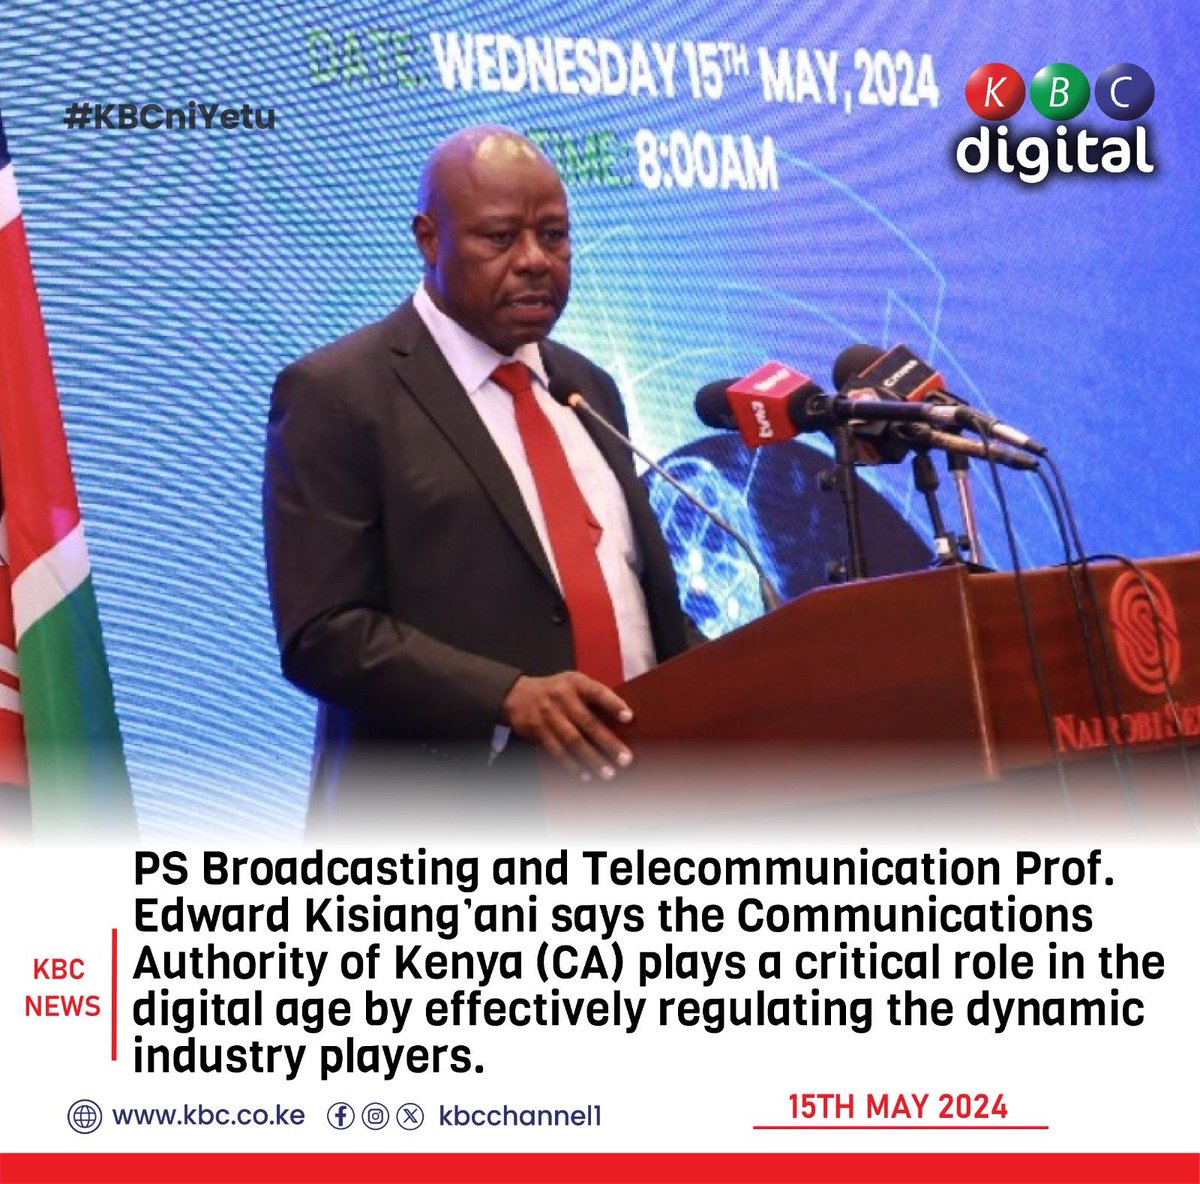 PS Broadcasting and Telecommunication Prof. Edward Kisiang’ani says the Communications Authority of Kenya (CA) plays a critical role in the digital age by effectively regulating the dynamic industry players. #KBCniYetu ^RO